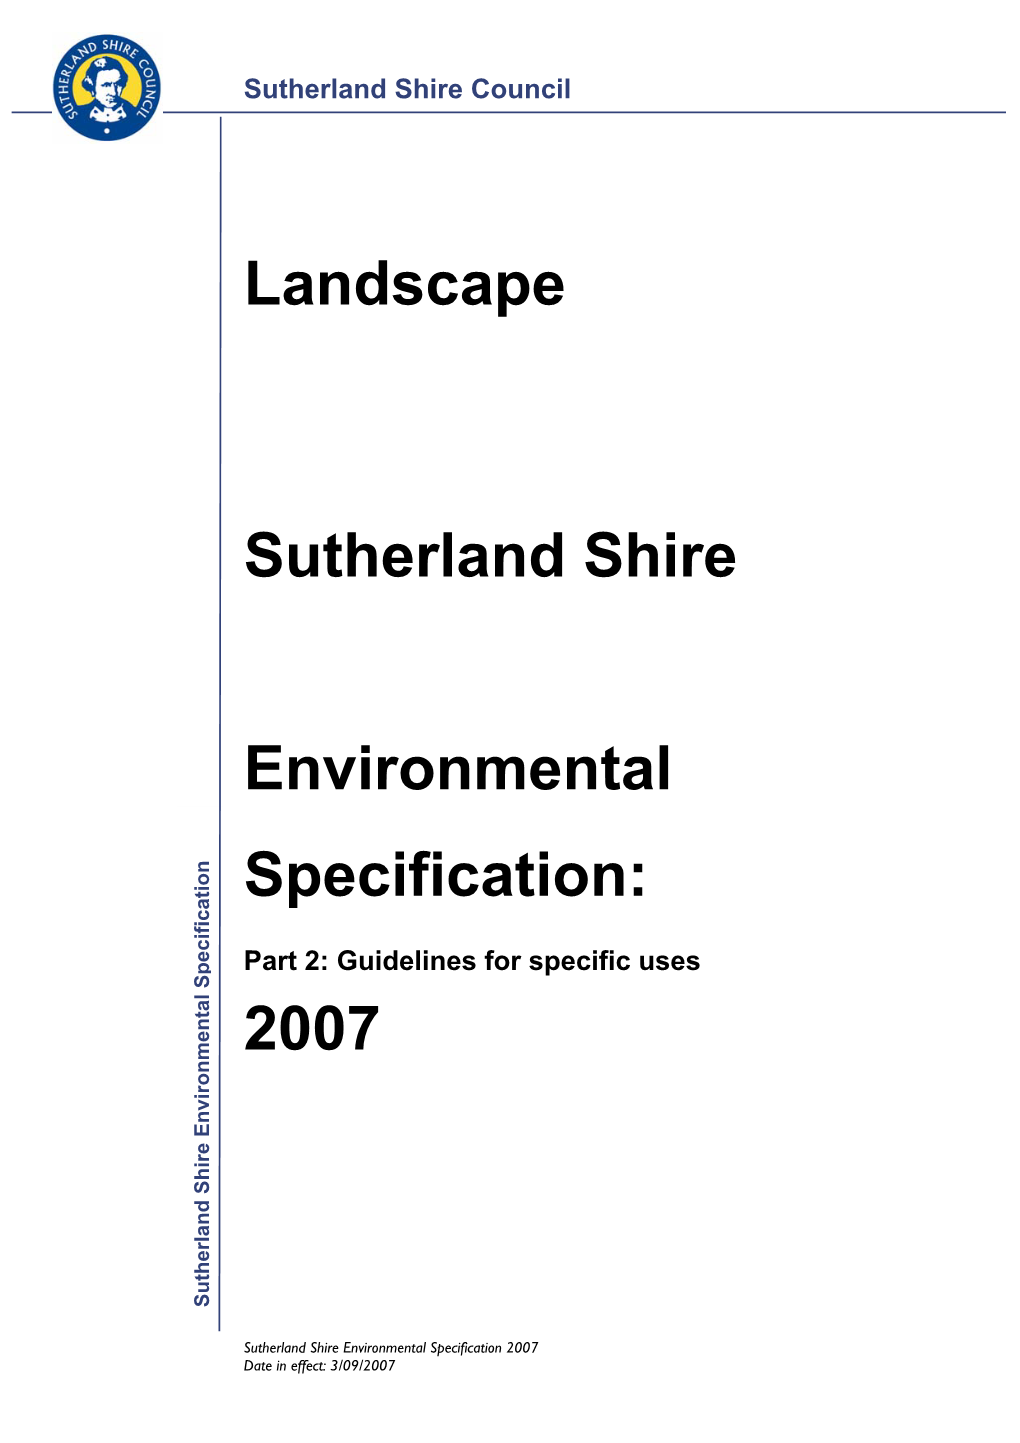 Landscape Sutherland Shire Environmental Specification: 2007